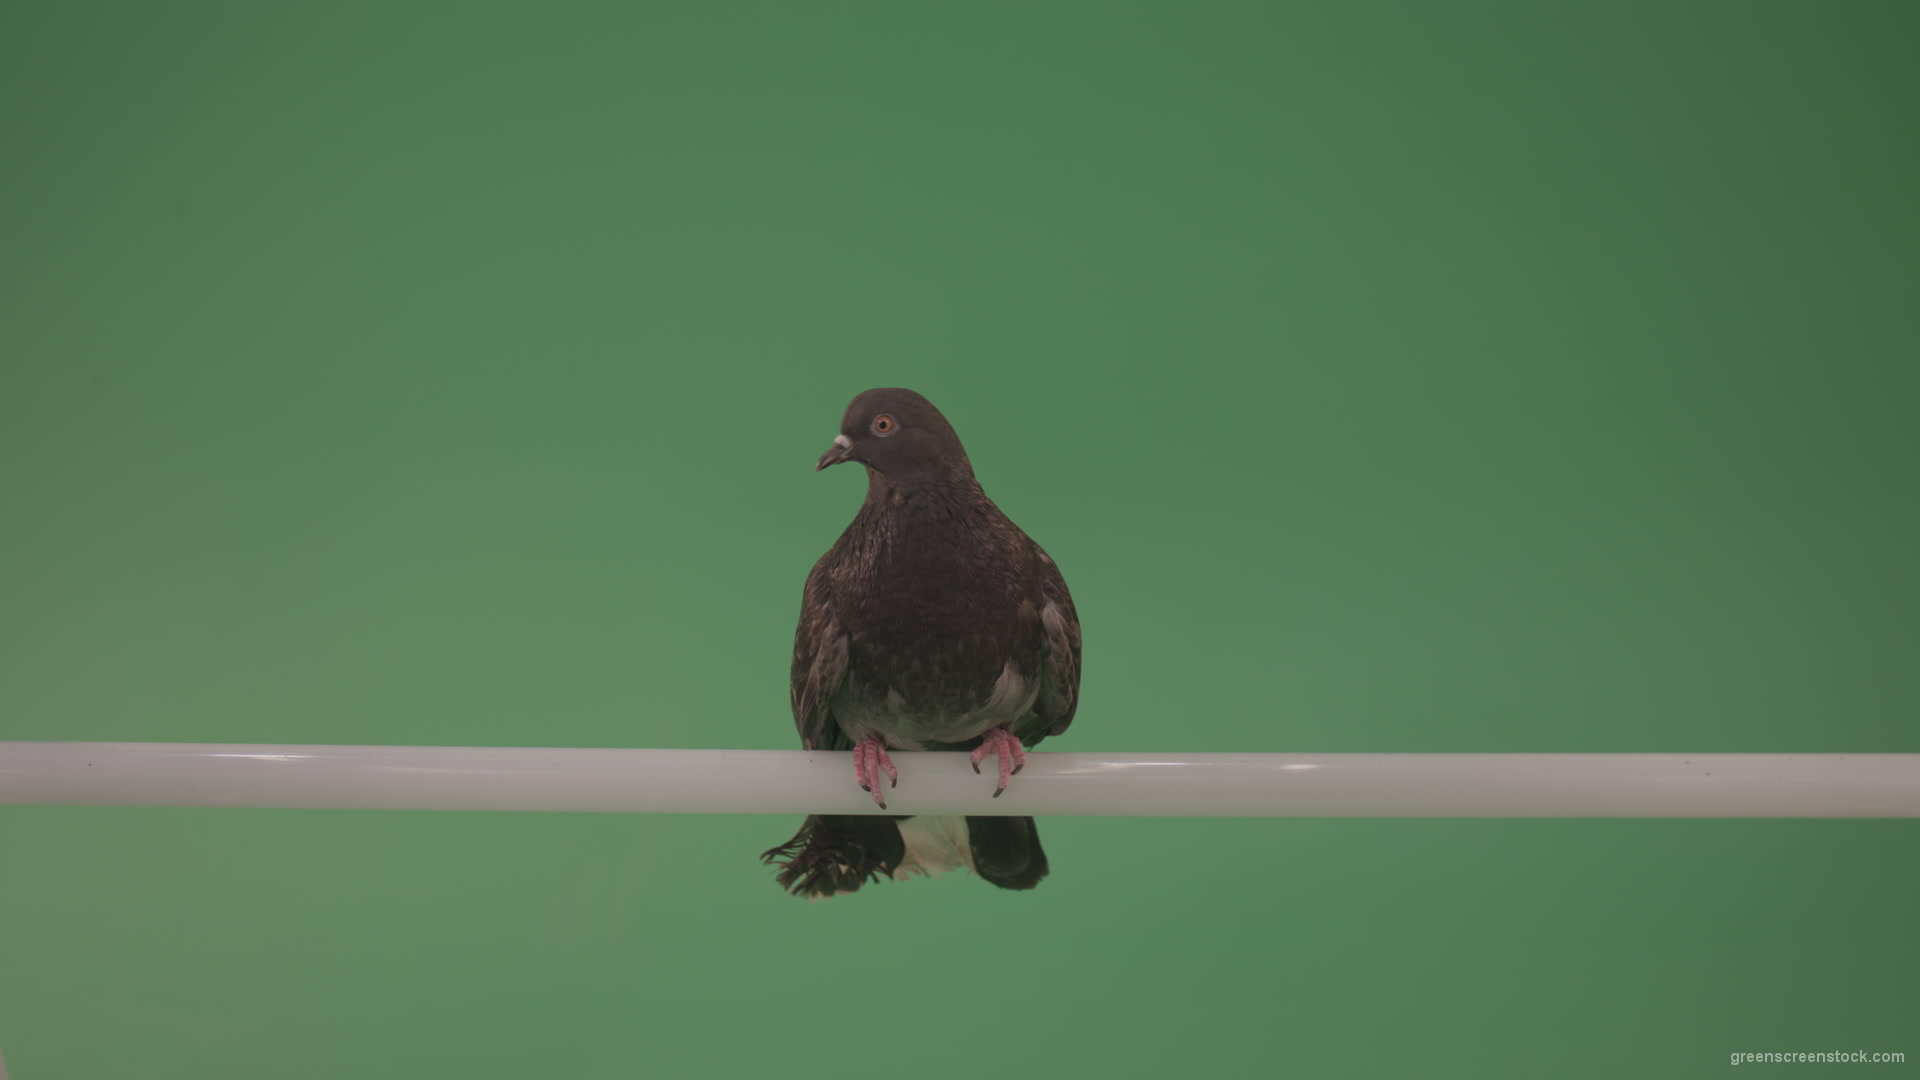 Wild-bird-doves-sit-on-the-branch-and-peer-around-isolated-on-green-screen_002 Green Screen Stock